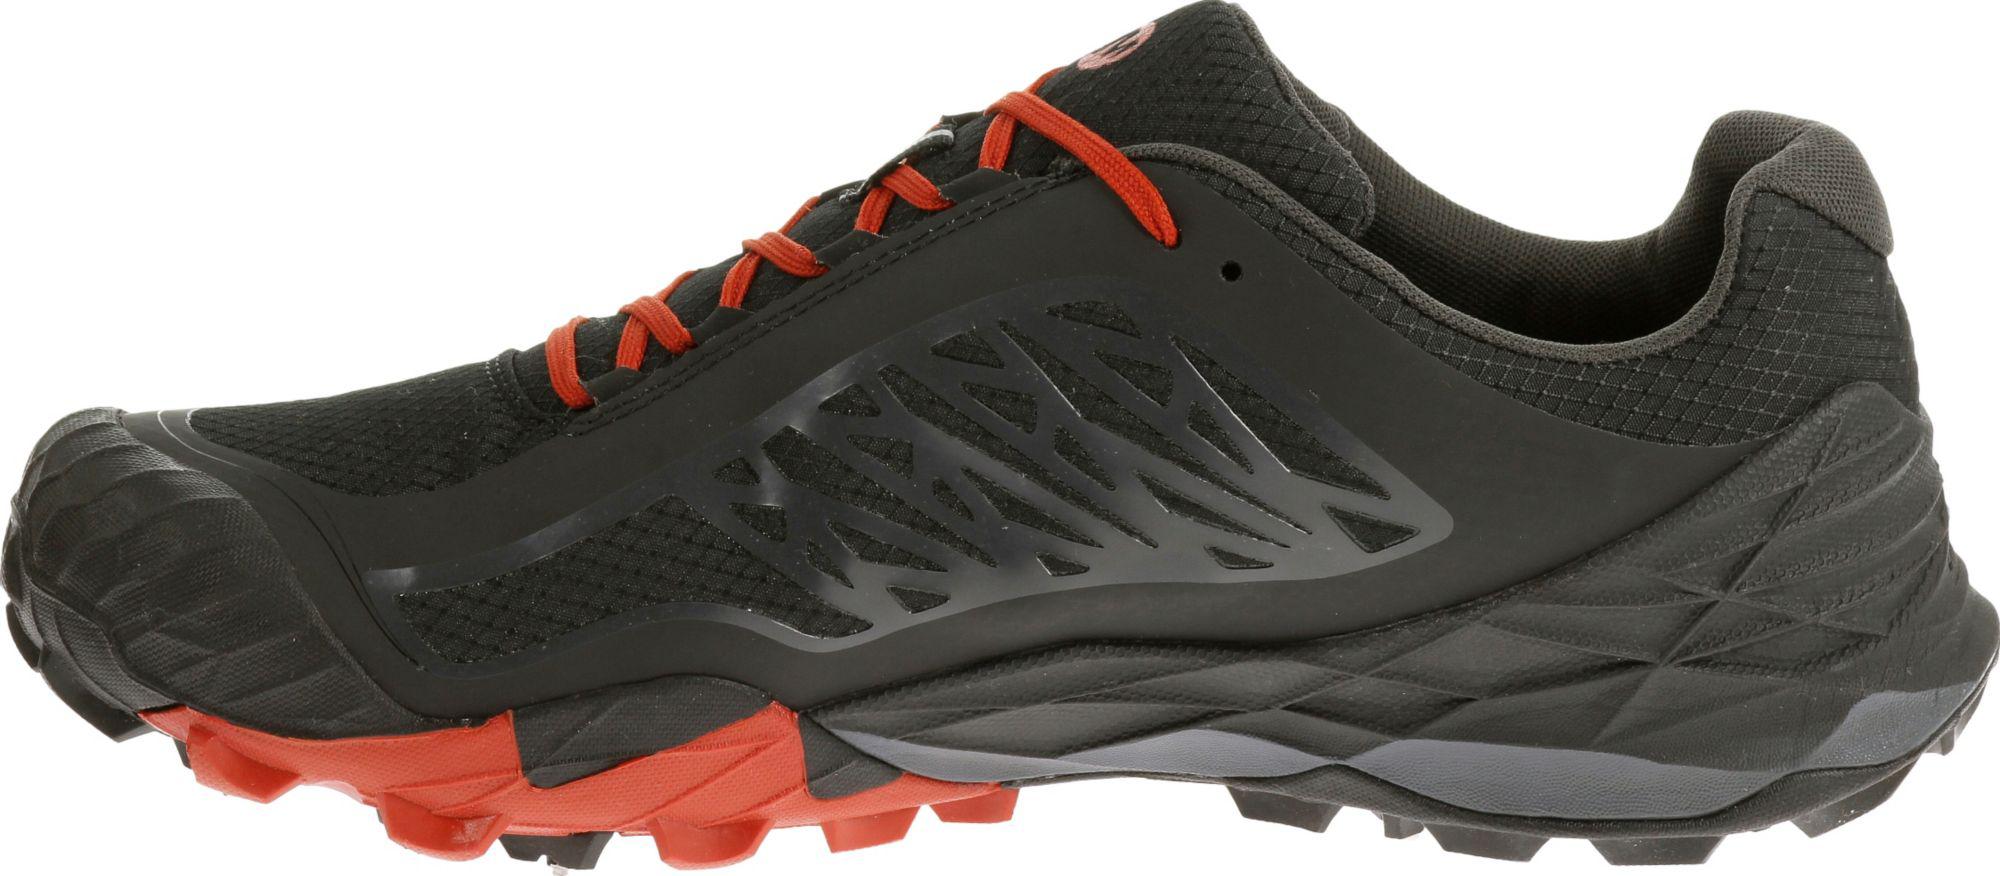 merrell all out terra ice